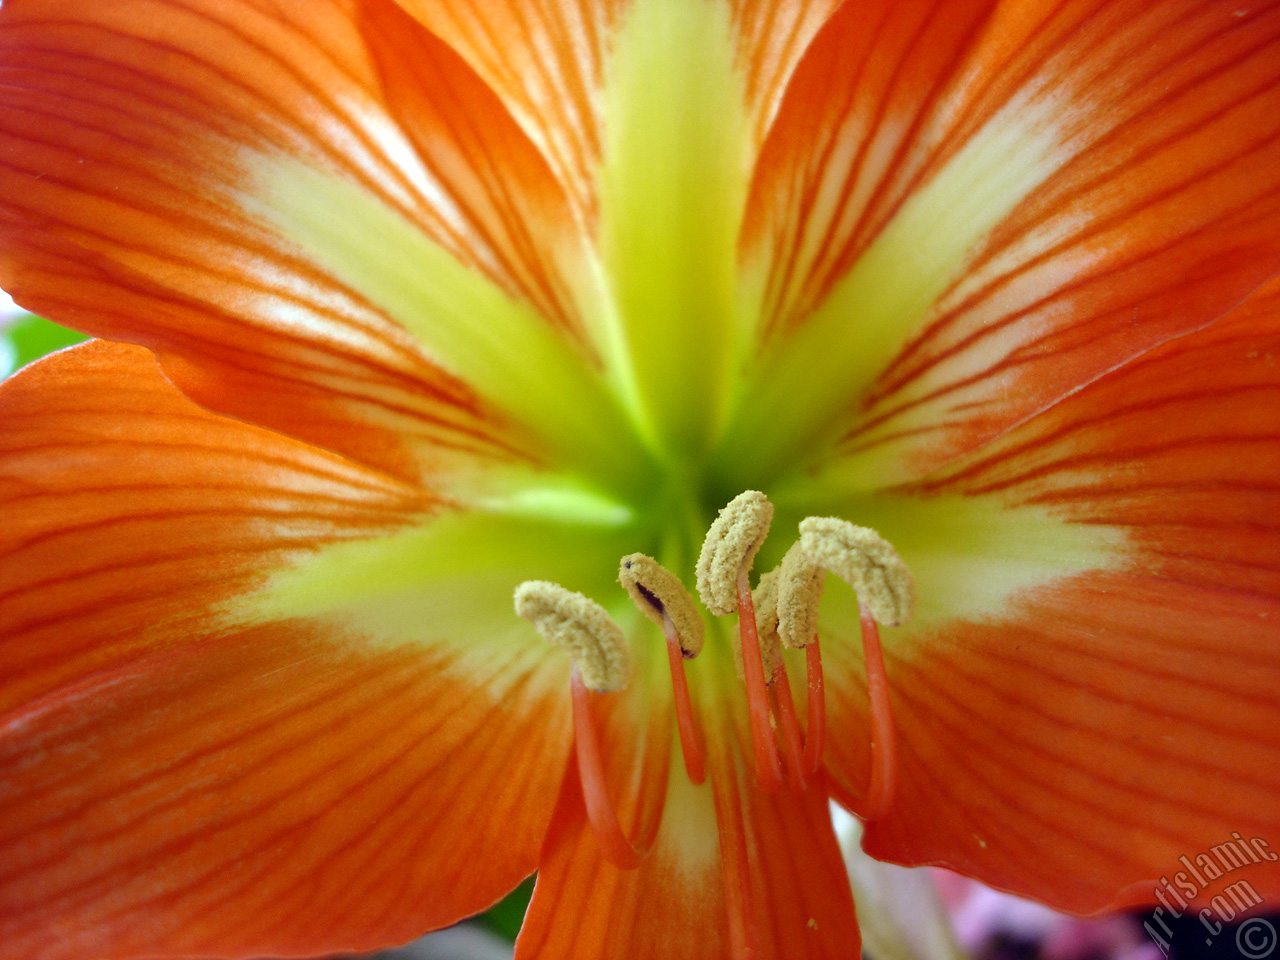 Red color amaryllis flower.
